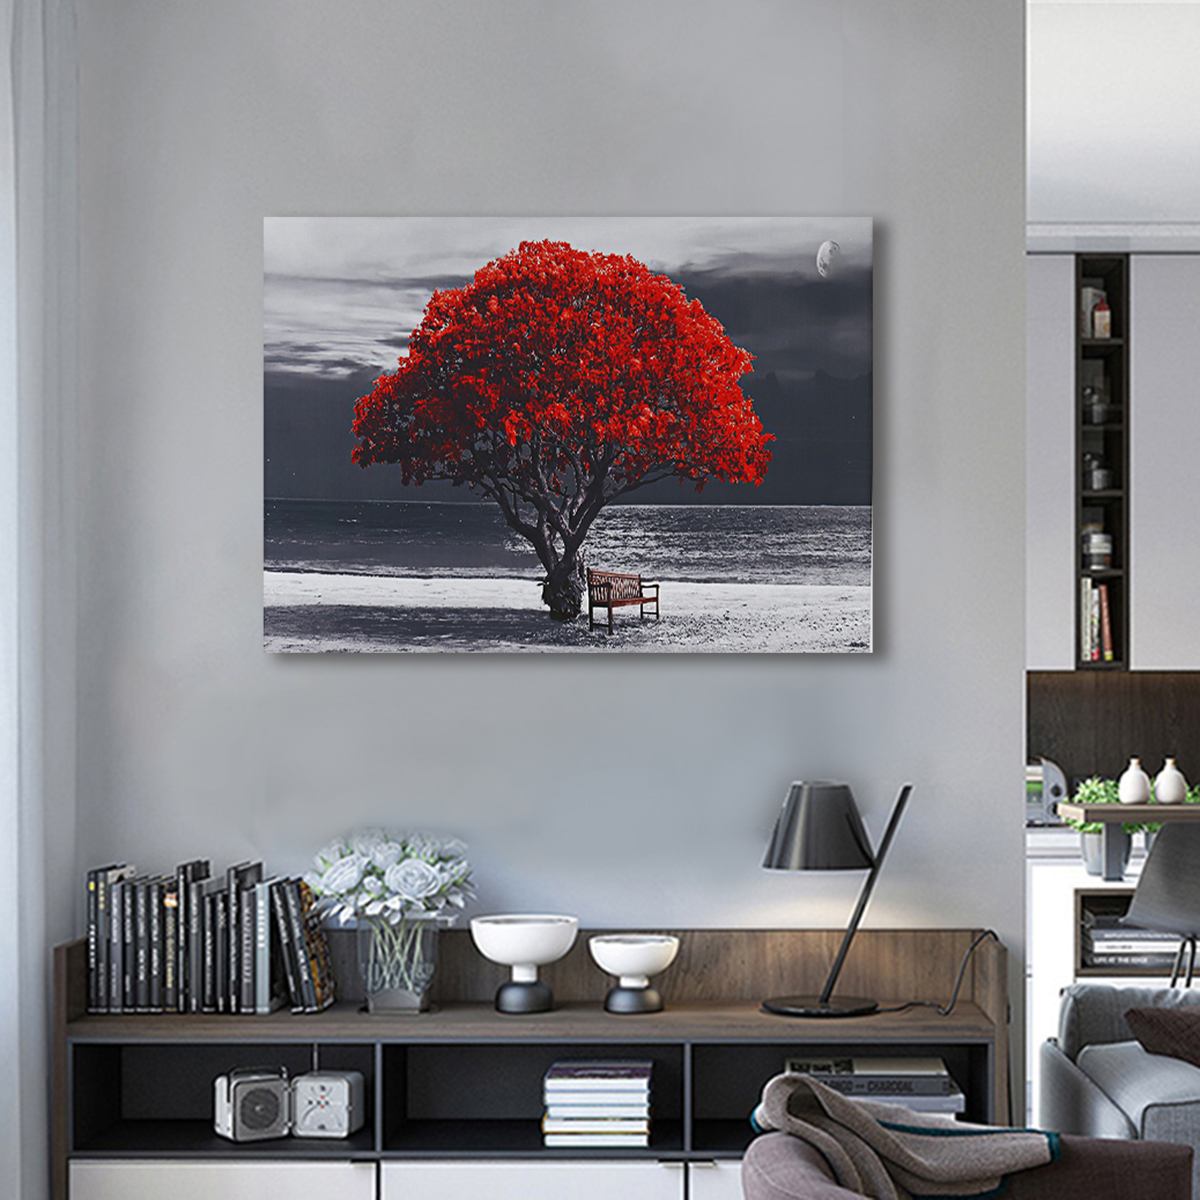 1-Piece-Big-Tree-Canvas-Painting-Wall-Decorative-Print-Art-Picture-Unframed-Wall-Hanging-Home-Office-1785043-10